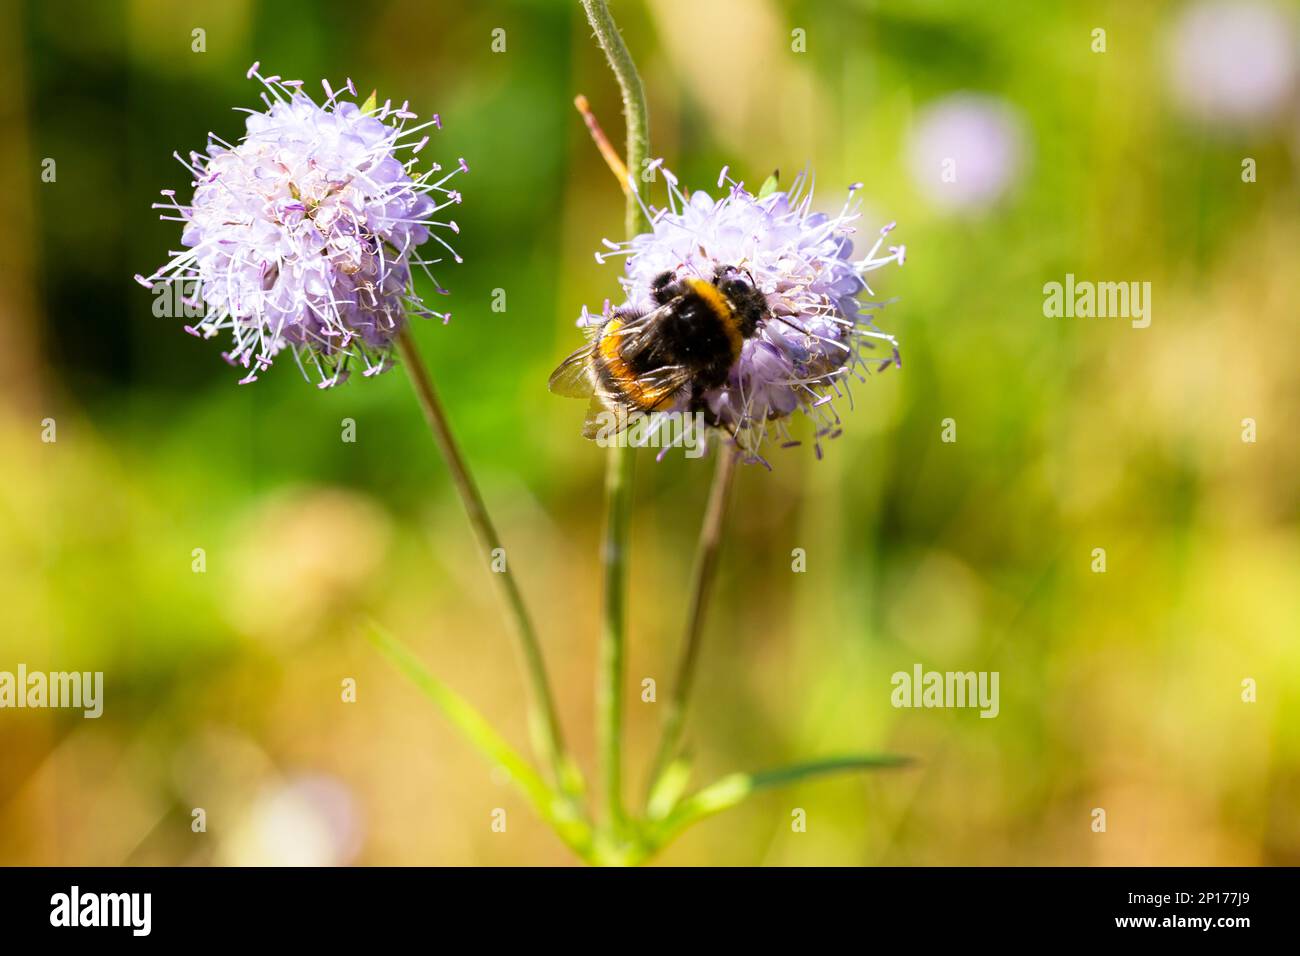 Scabiosa pink flower with bumblebee feeding and blurred plants with flowers in the background with good copy space. Stock Photo